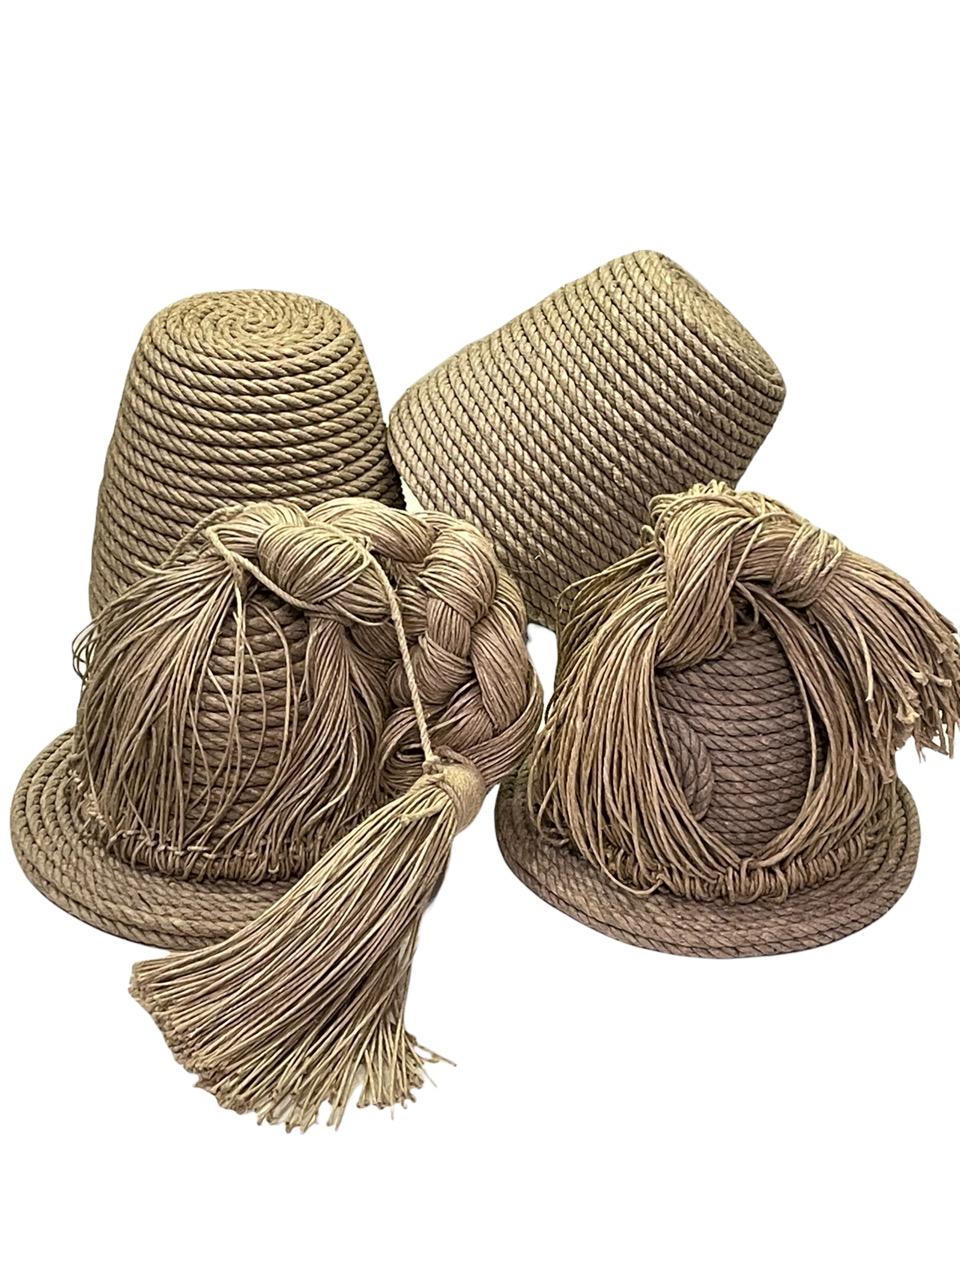 Pair of Contemporary 21st Century French Christian Astuguevieille Jute Rope Co For Sale 6